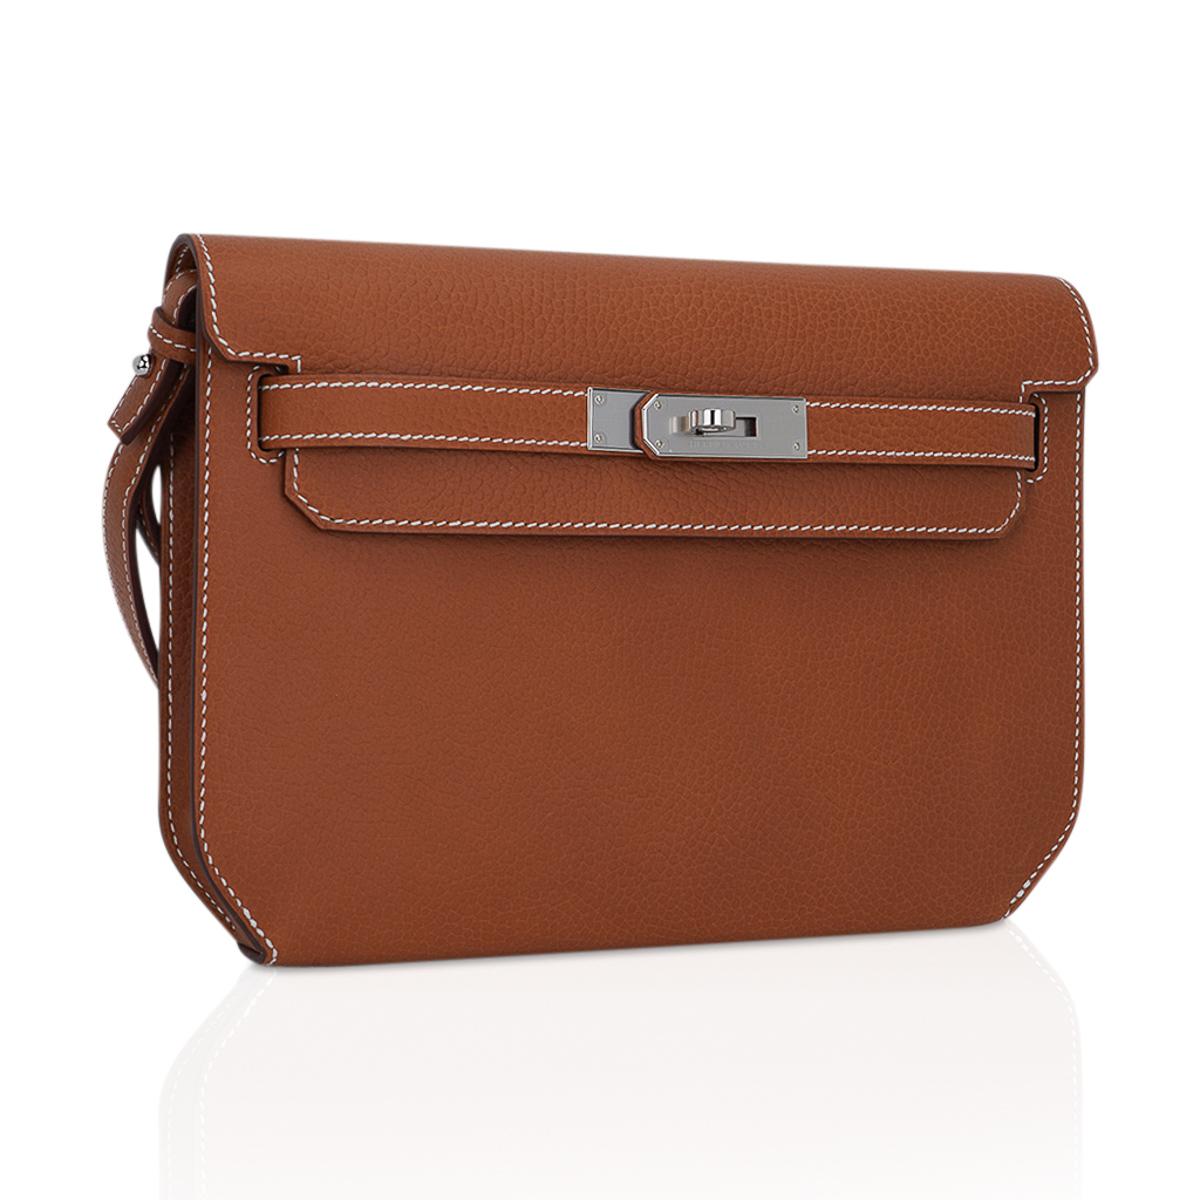 Mightychic offers an Hermes Kelly Depeches 25 Pouch featured in very rare Fauve Galop D'Hermes Vache leather.
Accentuated with signature bone topstitch.
This exquisite neutral bag is perfect for year round wear.
Fresh with Palladium hardware.
Pouch